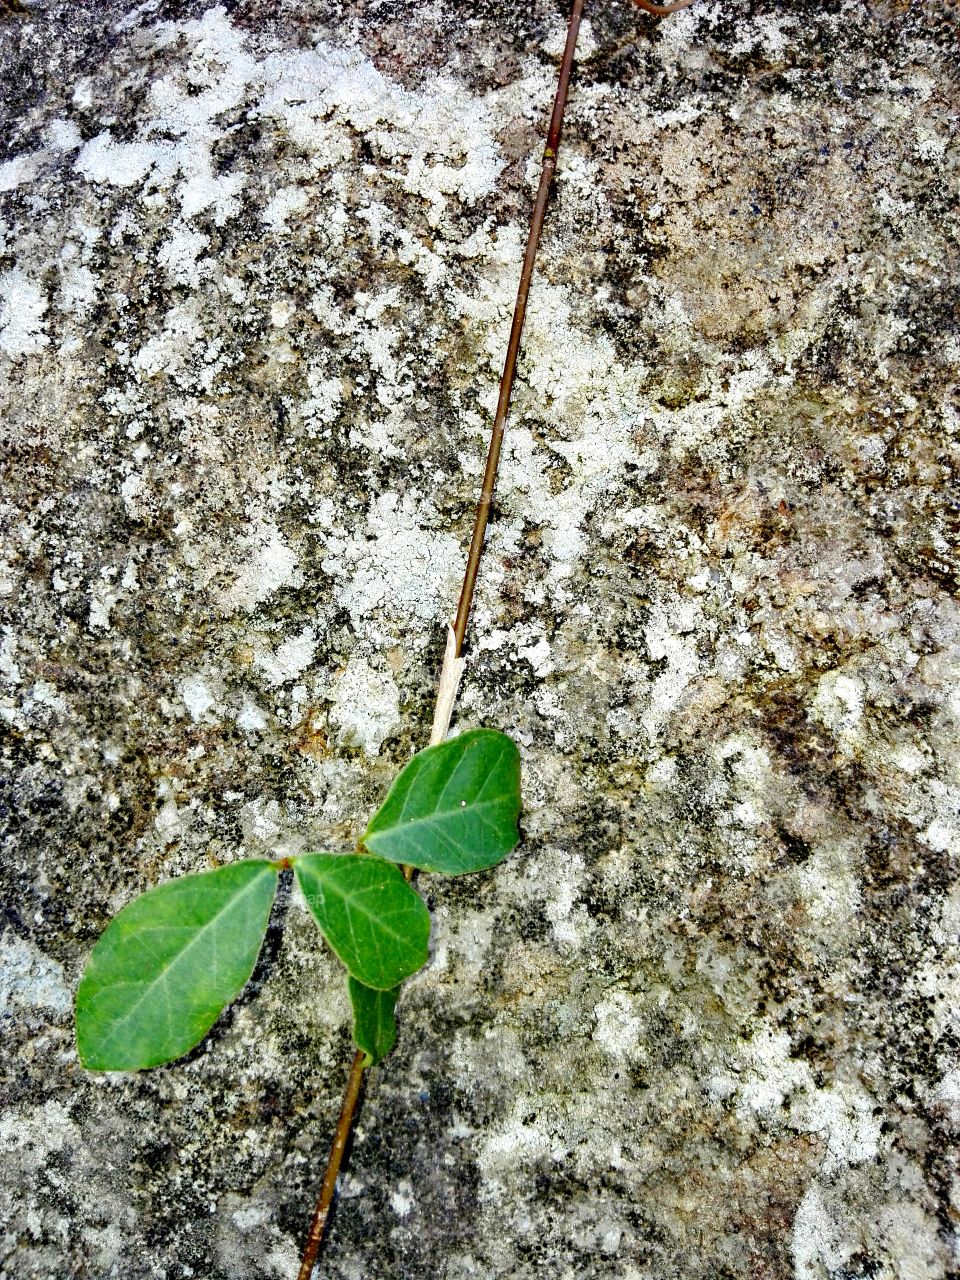 growth on the rock